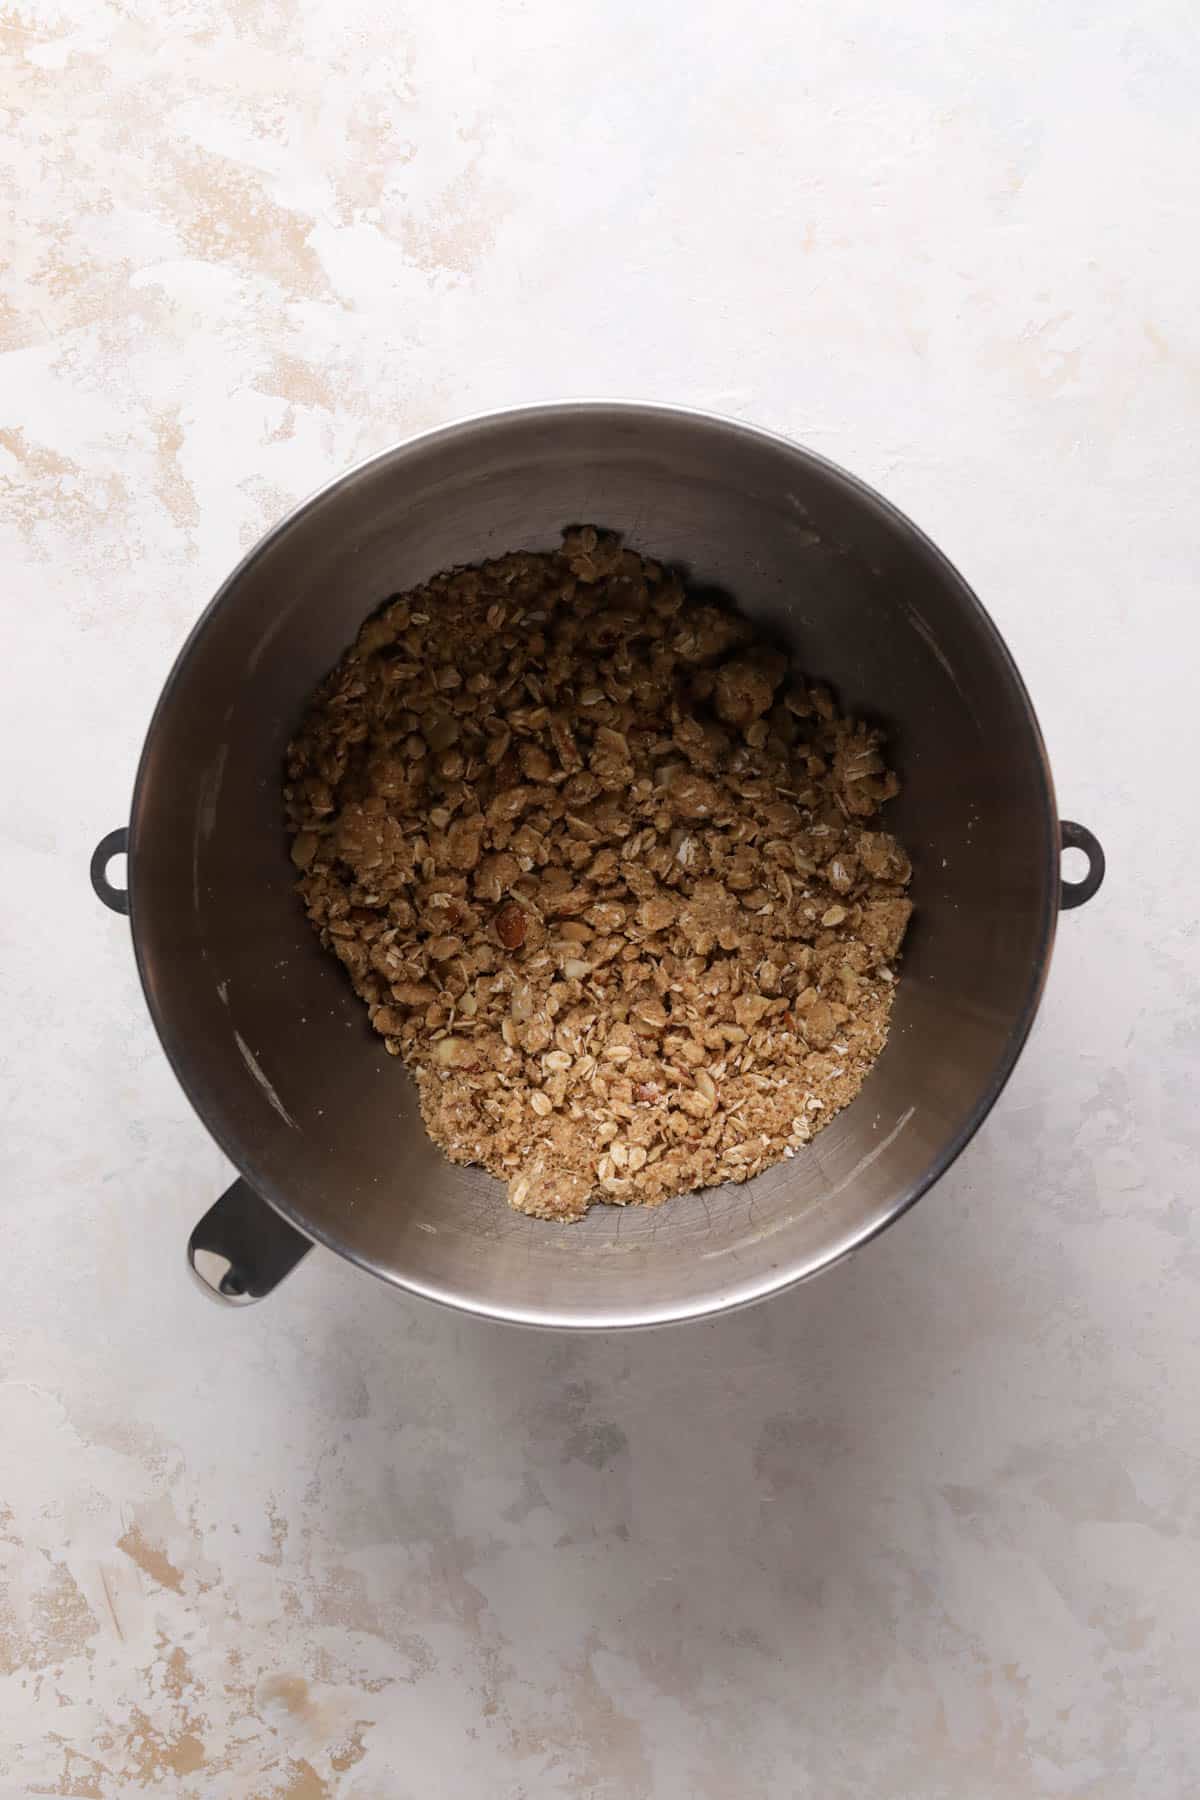 Crumble topping dry ingredients mixed with butter in a stand mixer bowl into a crumble consistency.